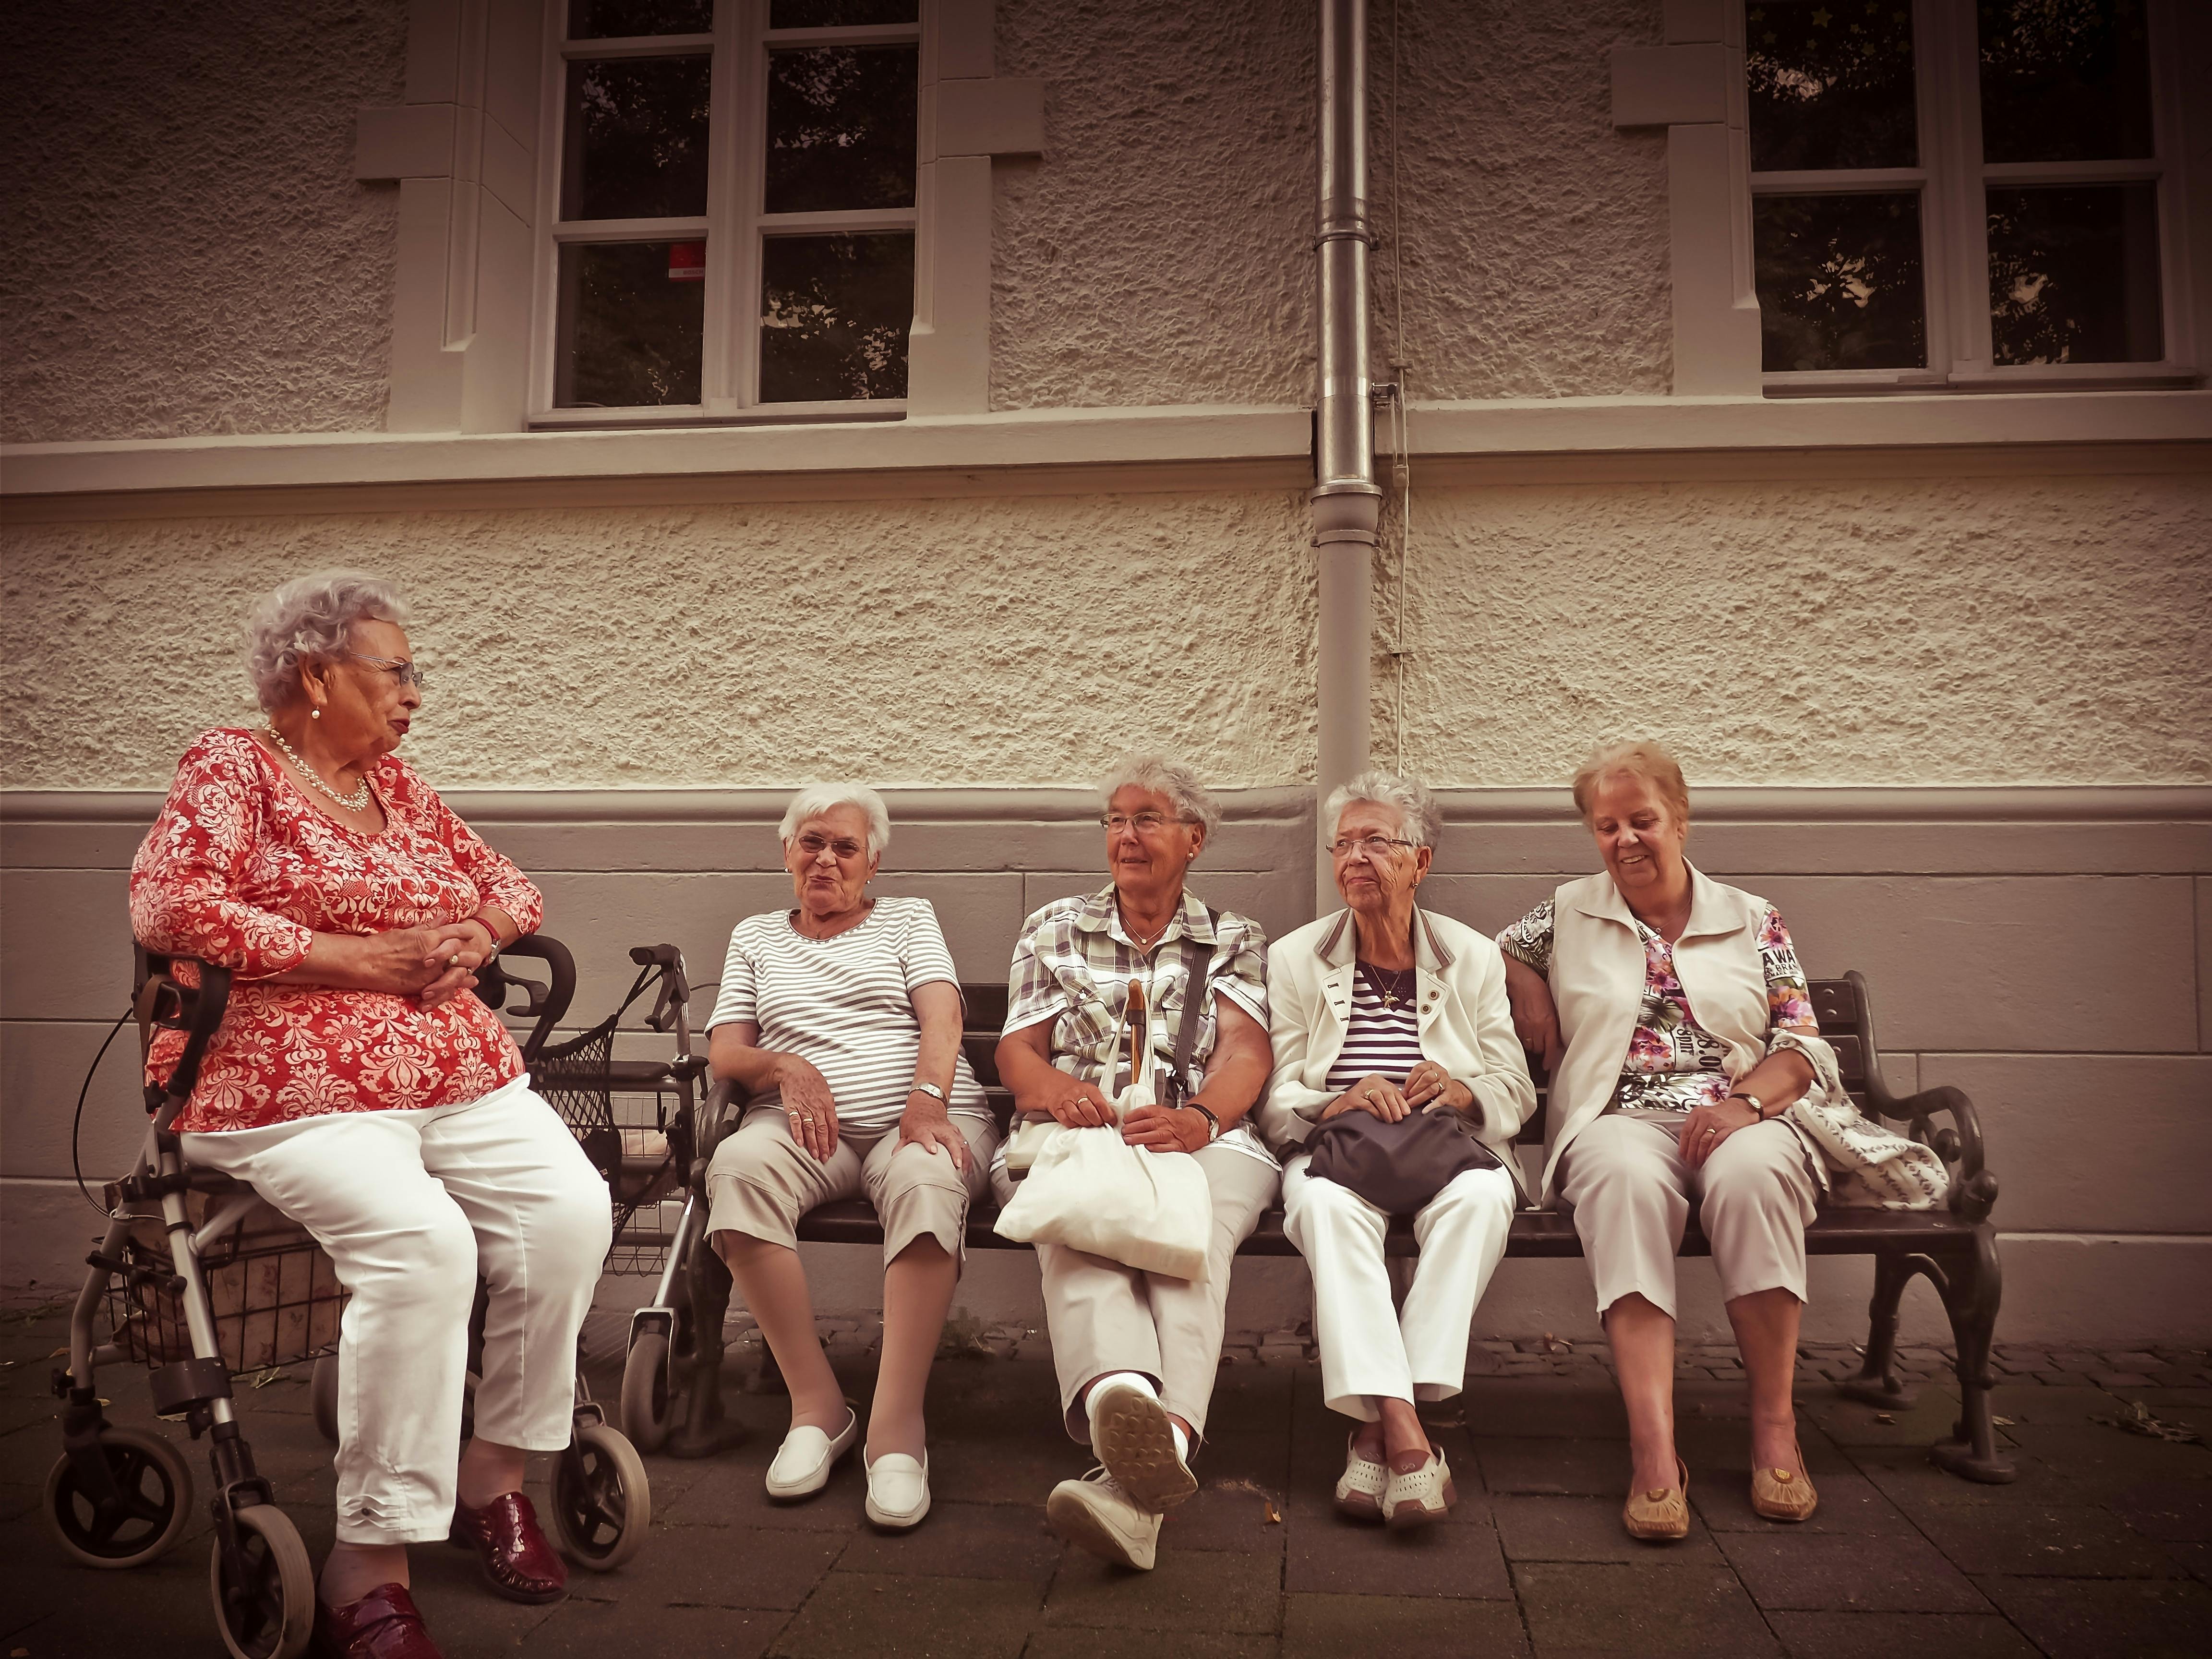 Group of old woman outdoors | Photo: Pexels